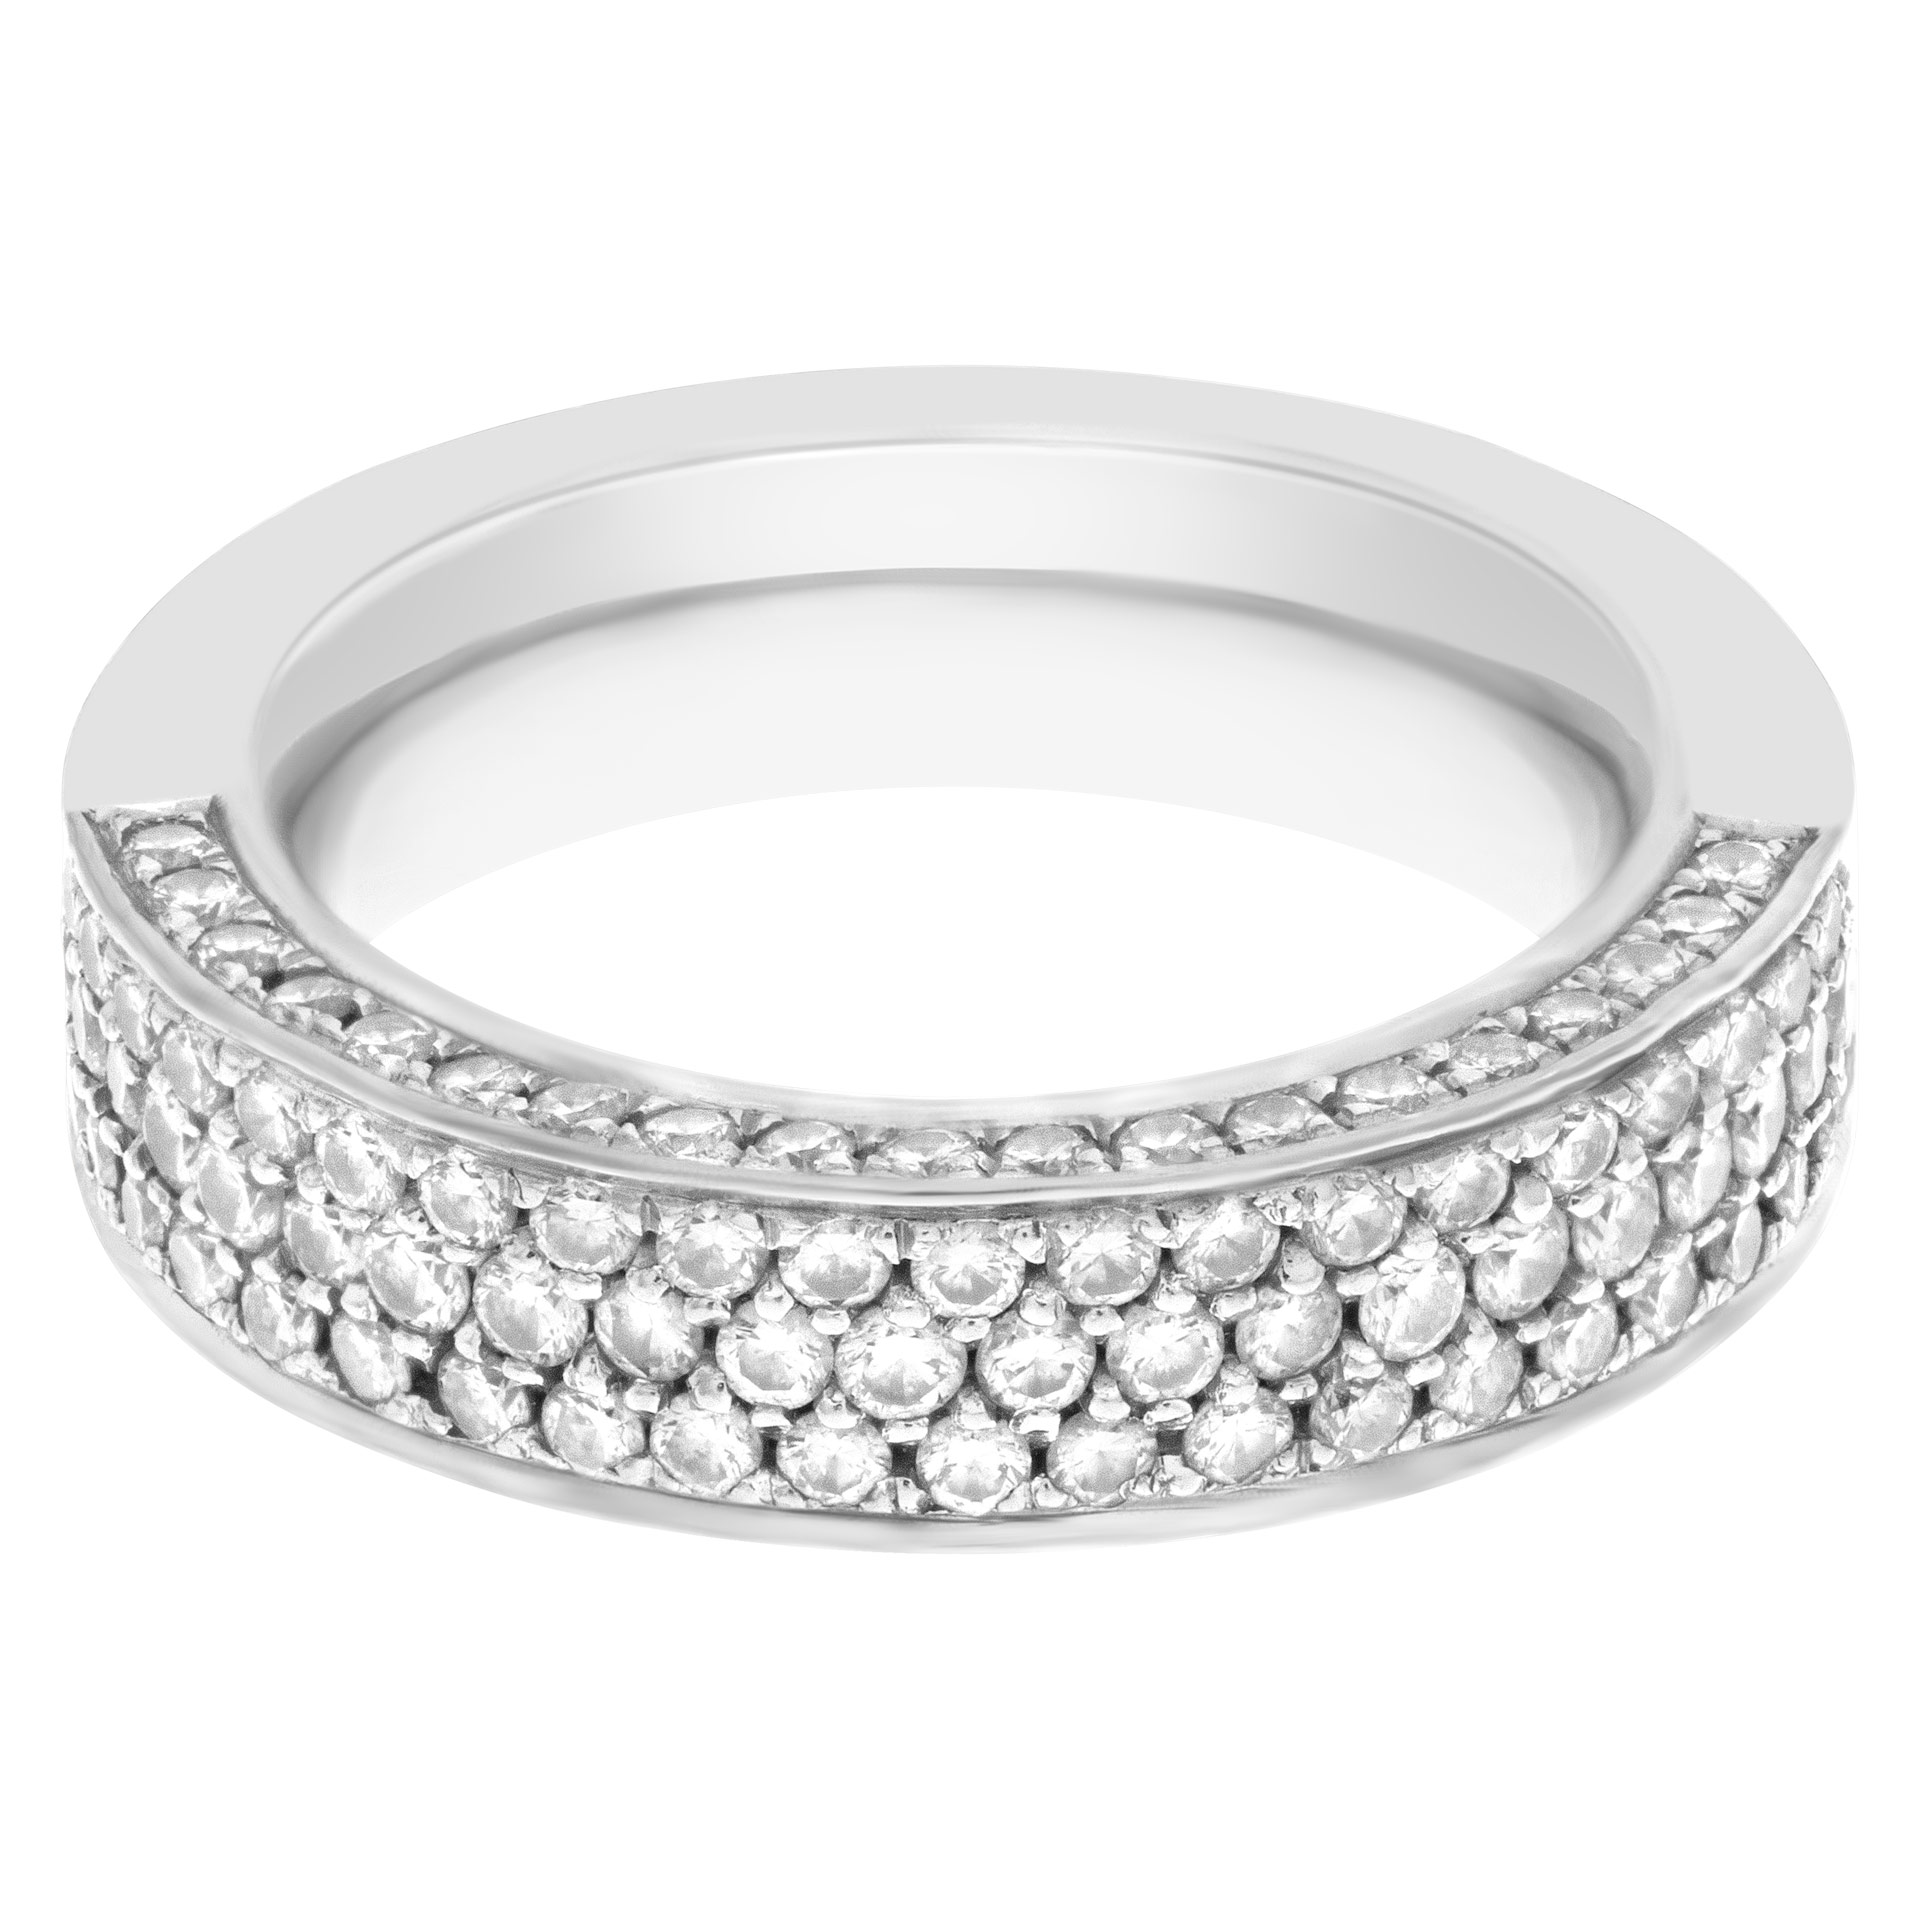 Wempe pave semi Diamond Eternity Band and Ring approx. 1.5 cts in diamonds image 1